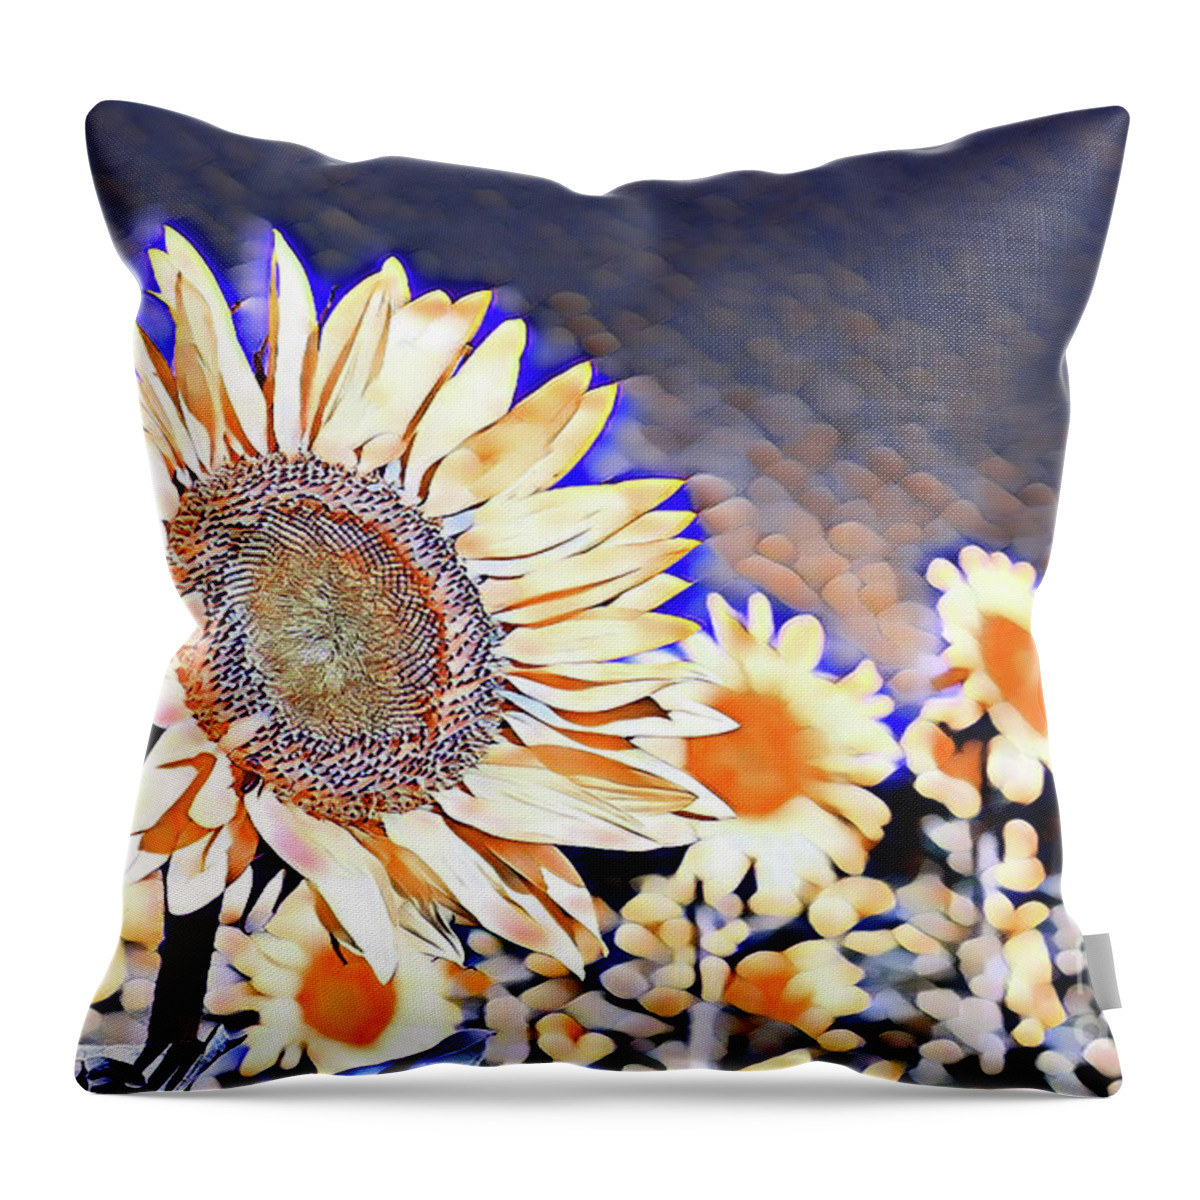 Sunflower Throw Pillow featuring the photograph Sunflowers In The Field by The James Roney Collection